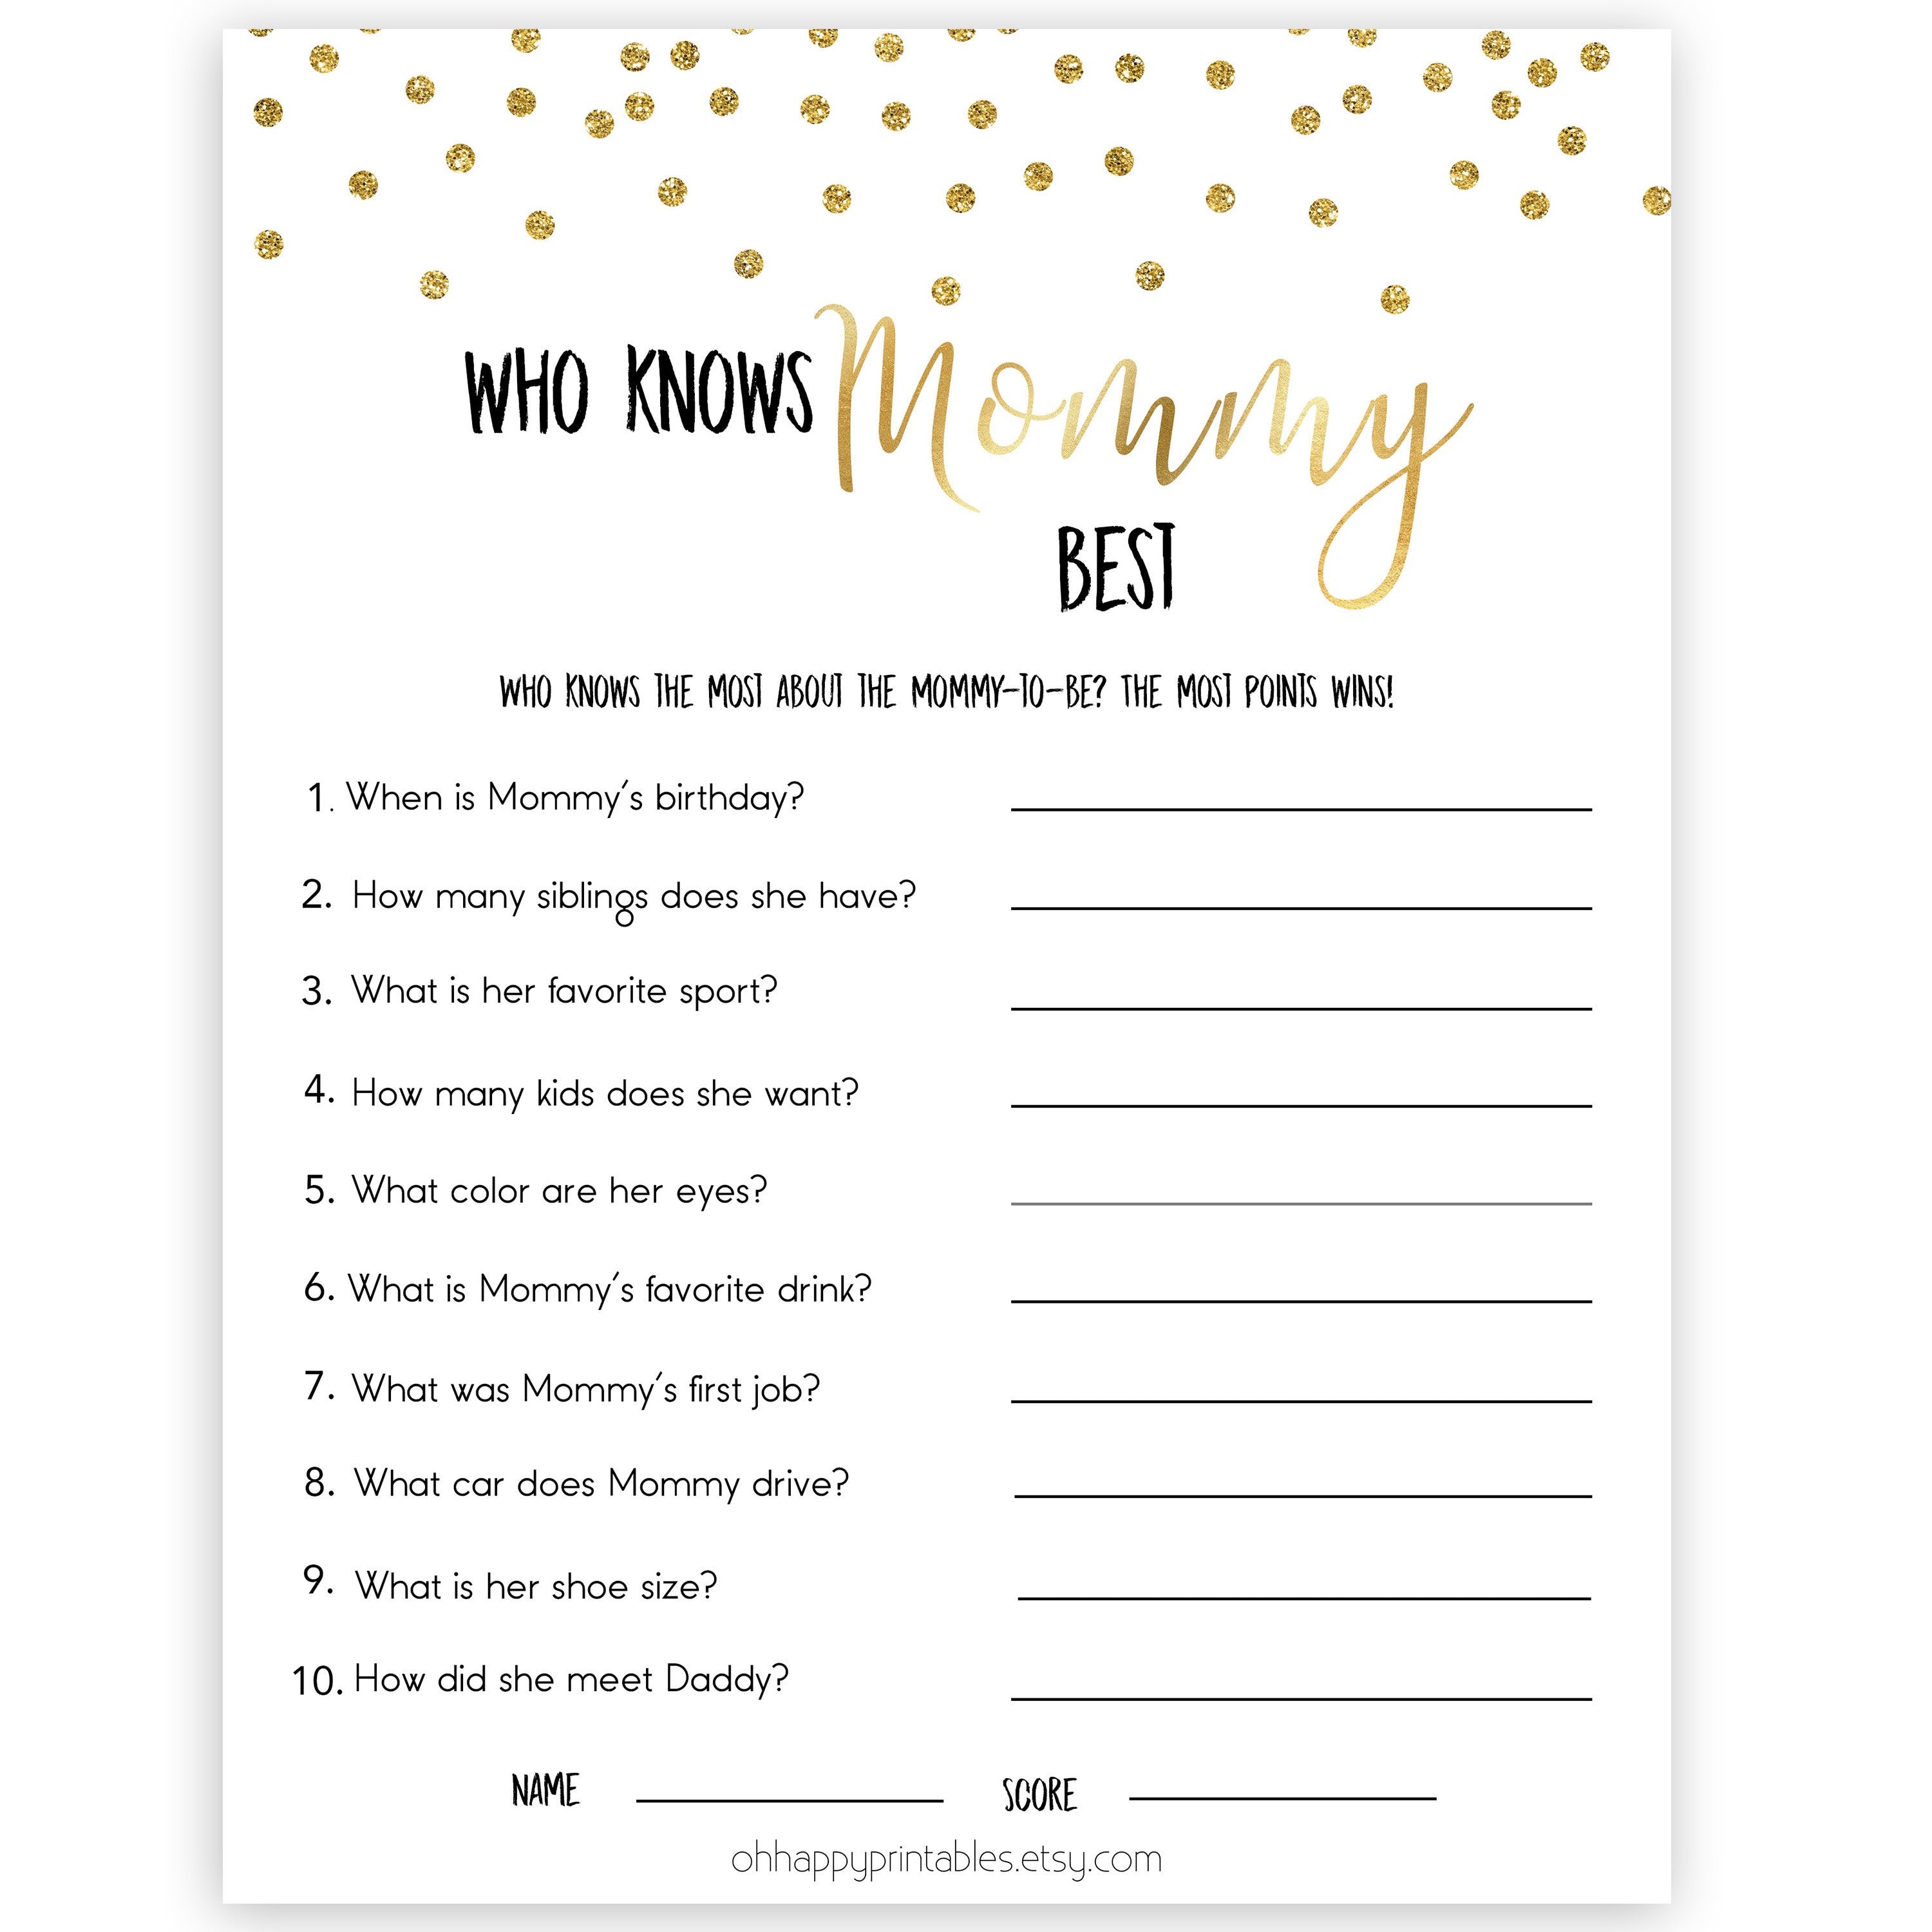 Gold Who Knows Mommy Best Quiz, Baby Shower Games, Knows Mummy Games, Gold Glitter Baby Shower Games, Gold Fun Baby Shower Games 